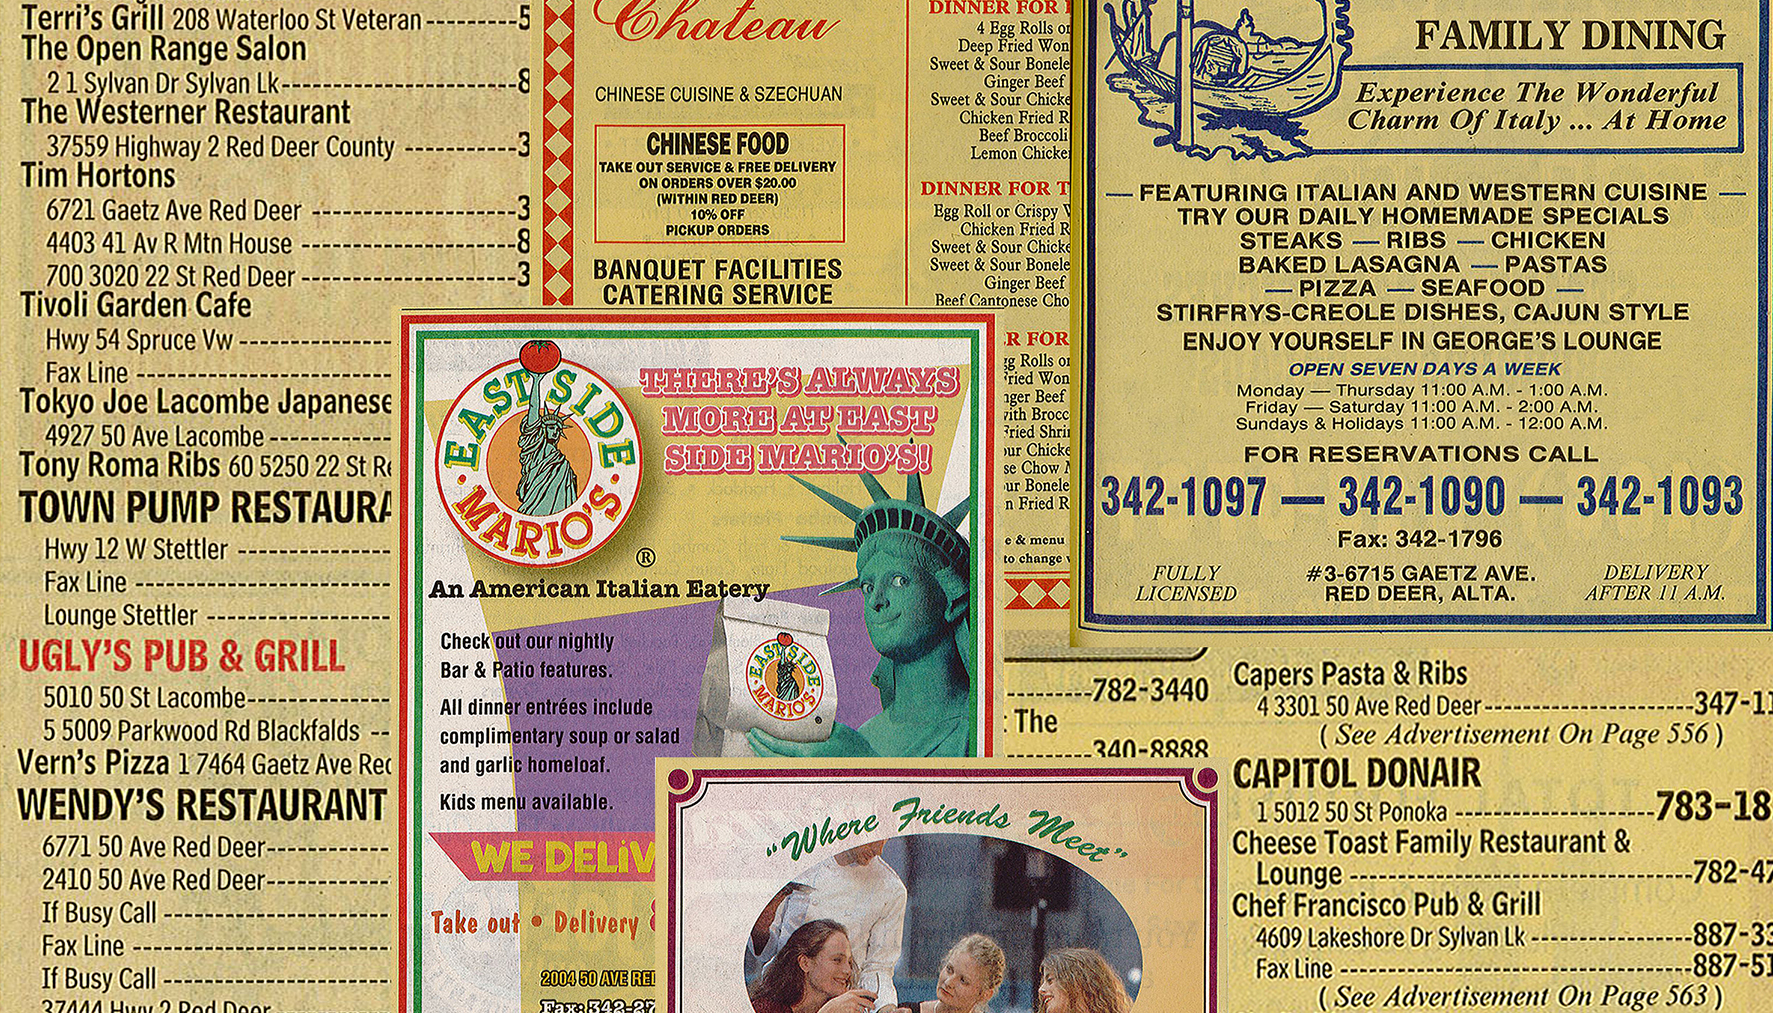 Restaurant advertisements from the 2003-2004 Red Deer Yellow Pages telephone book